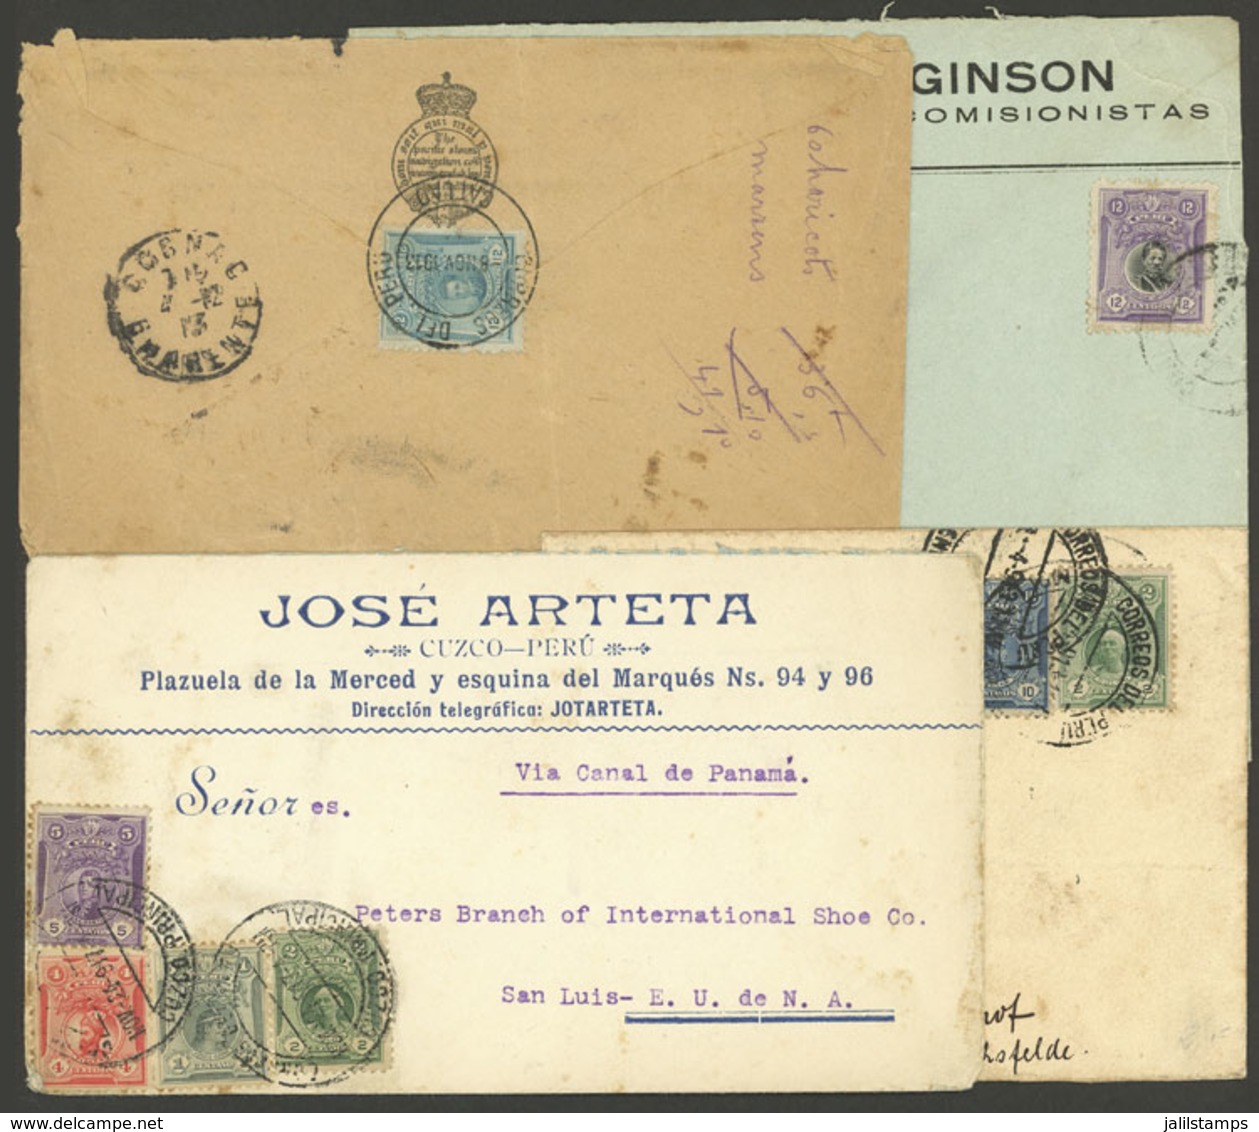 PERU: 4 Covers Mailed Overseas Between 1913 And 1917 Via The Panama Canal, With 12c. Postage (all Different), Very Nice! - Perú